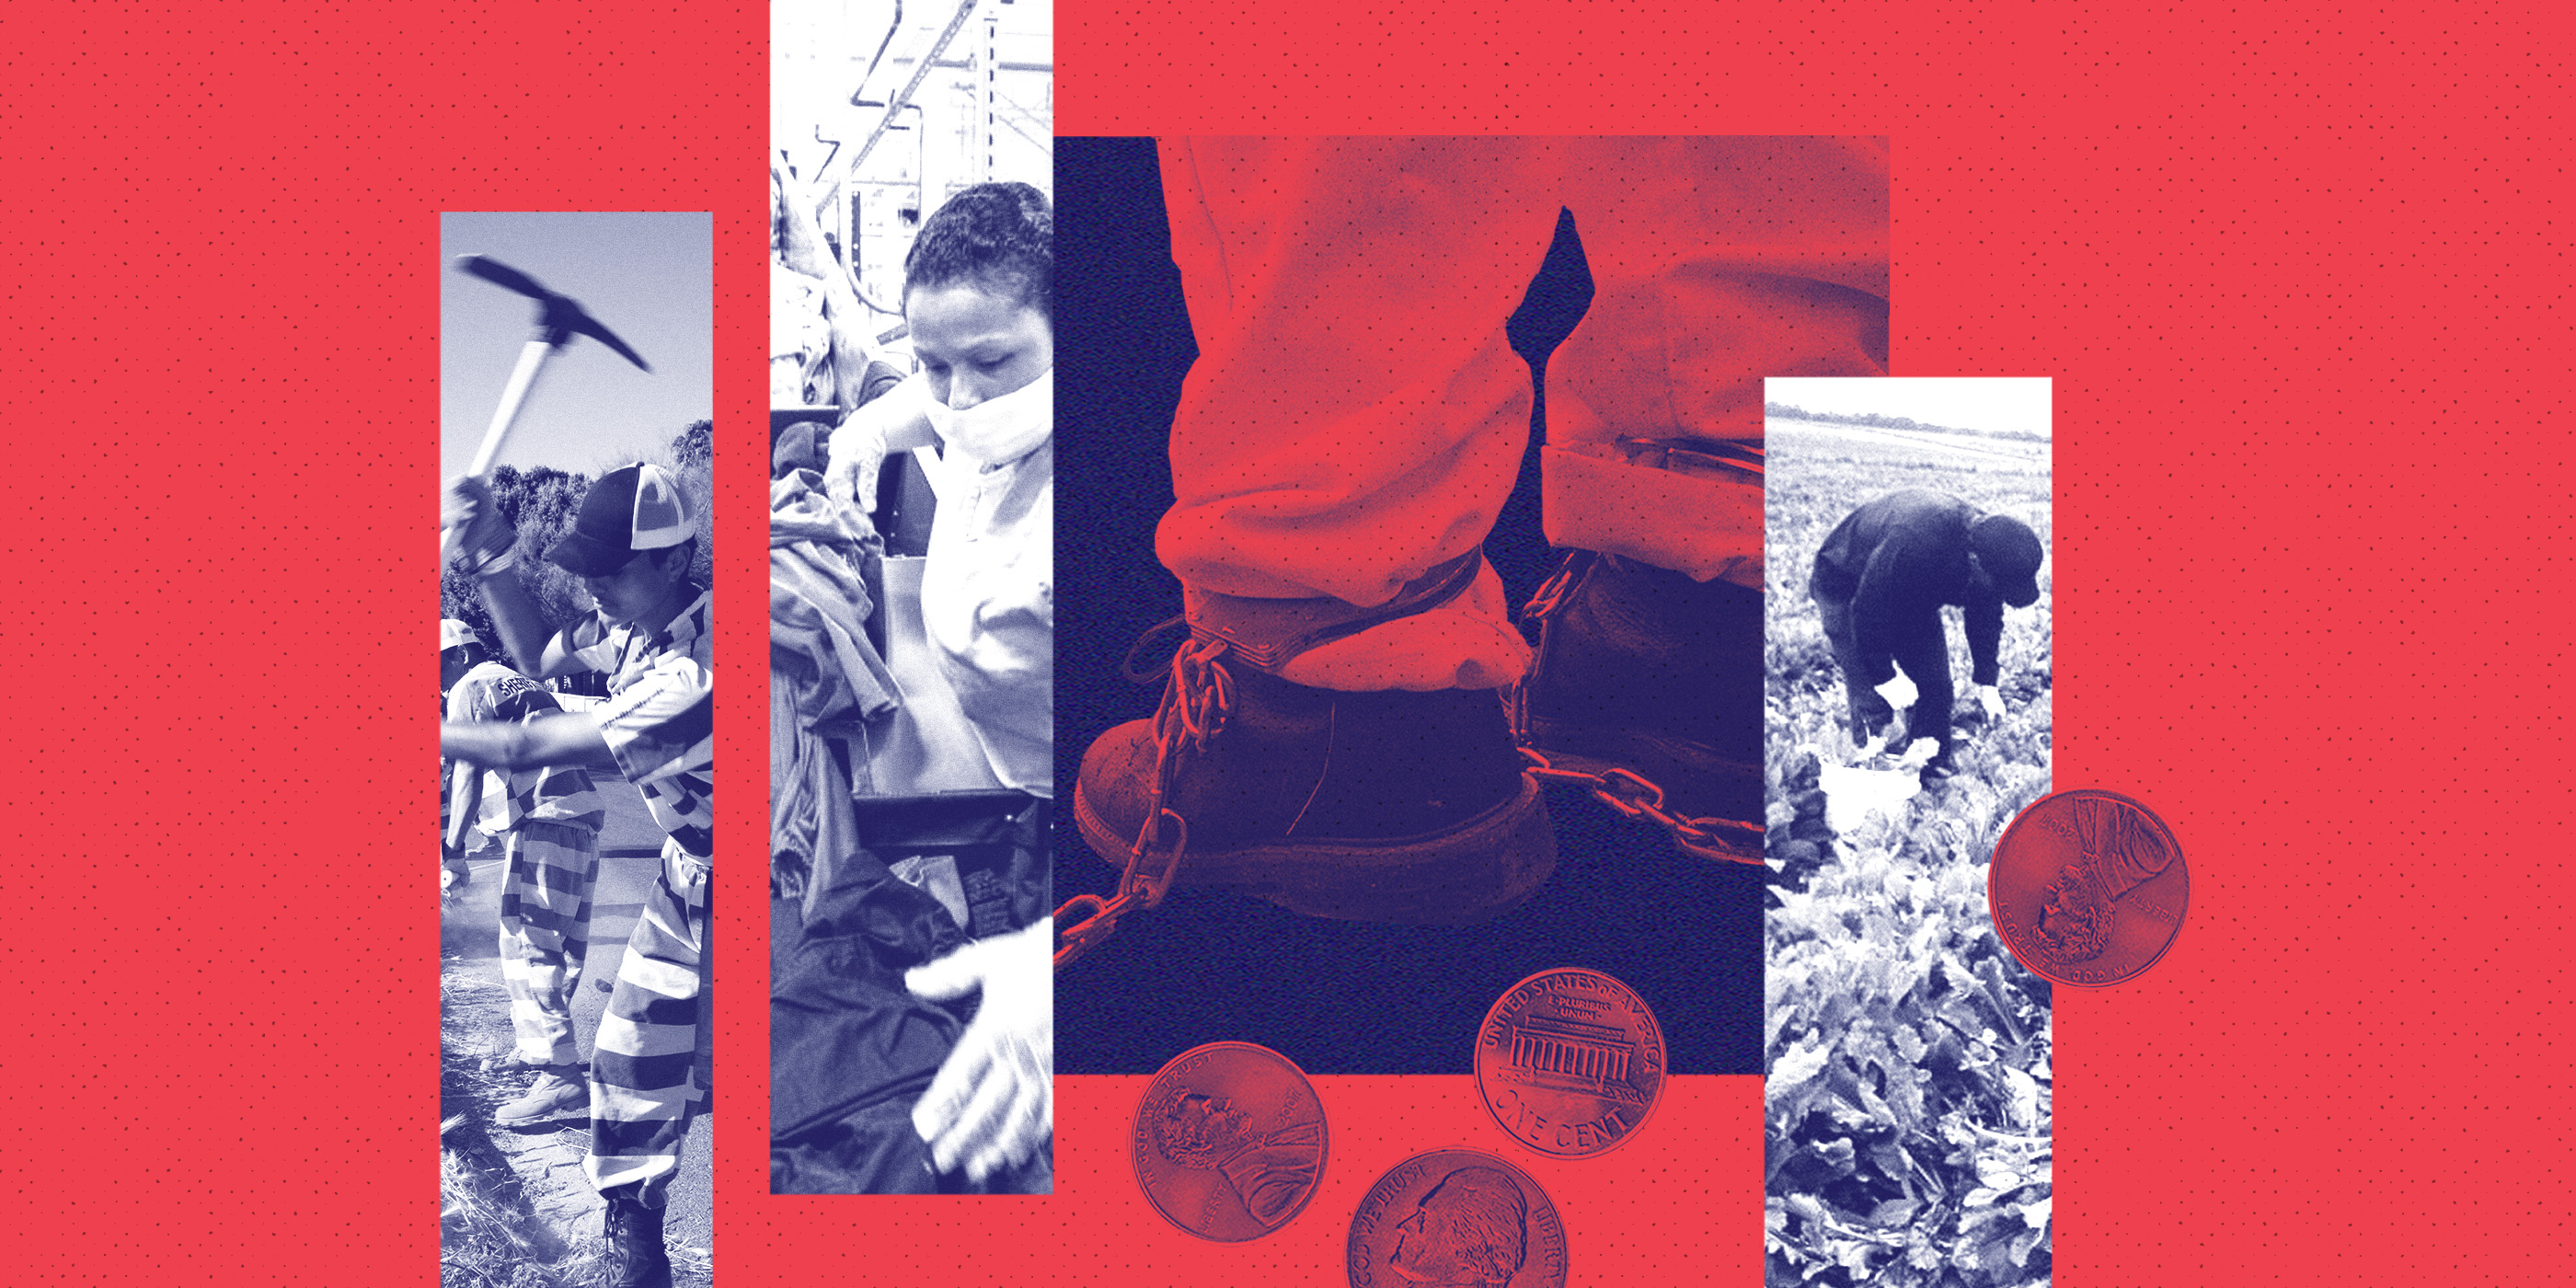 A collage of images depicting prison labor.